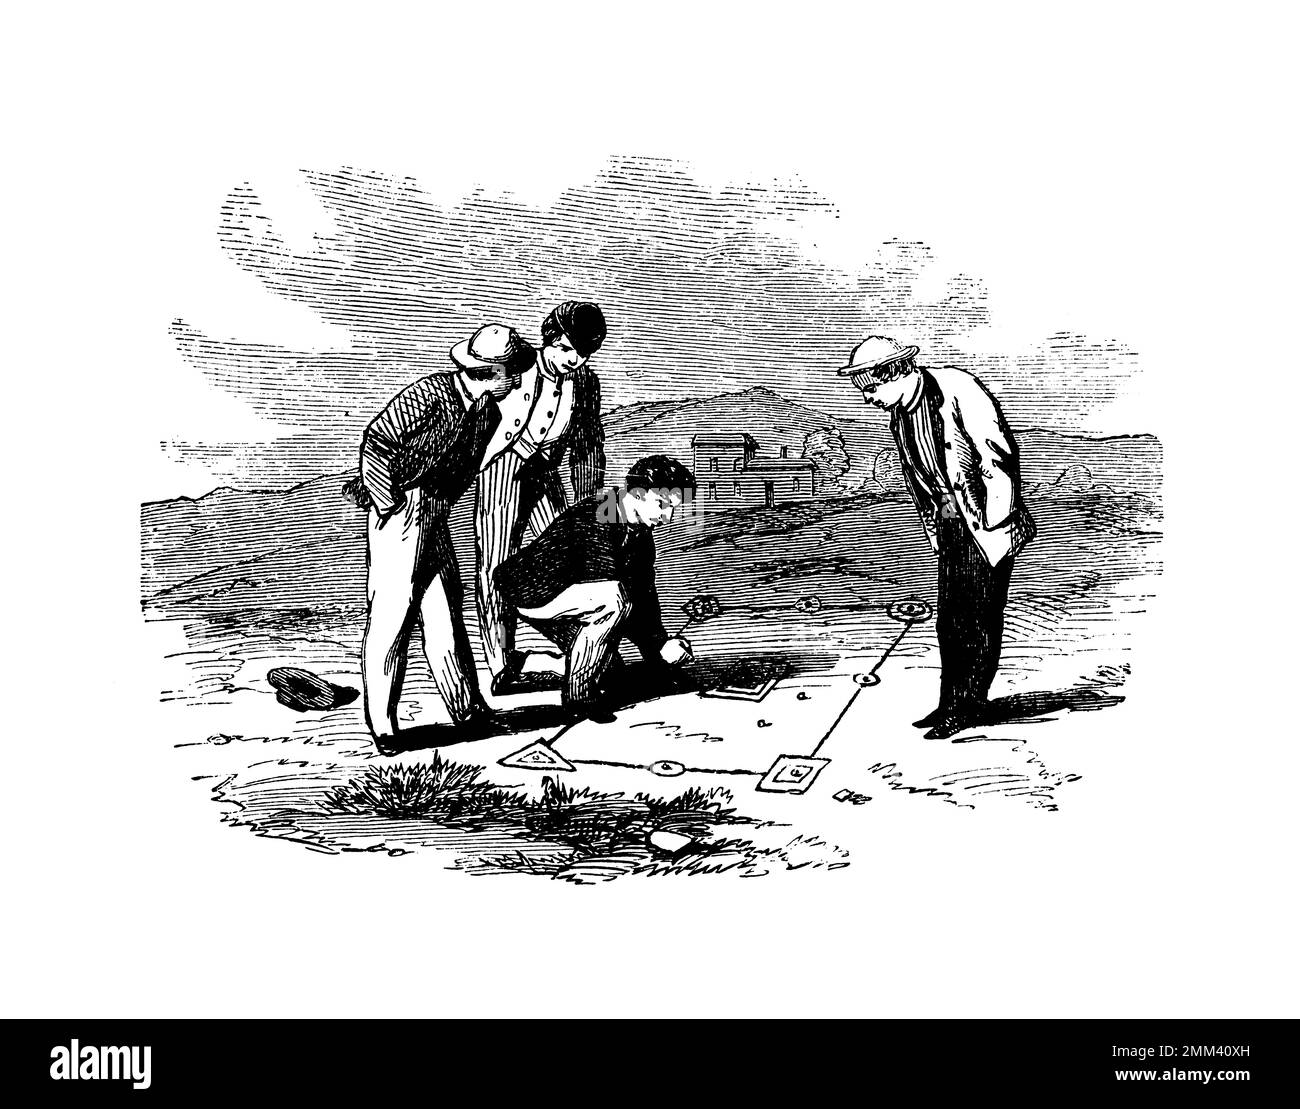 Antique illustration of fortifications, an outdoor game of marbles similar to picking cherries. Published in American’s Boy Book of Sports and Games, Stock Photo